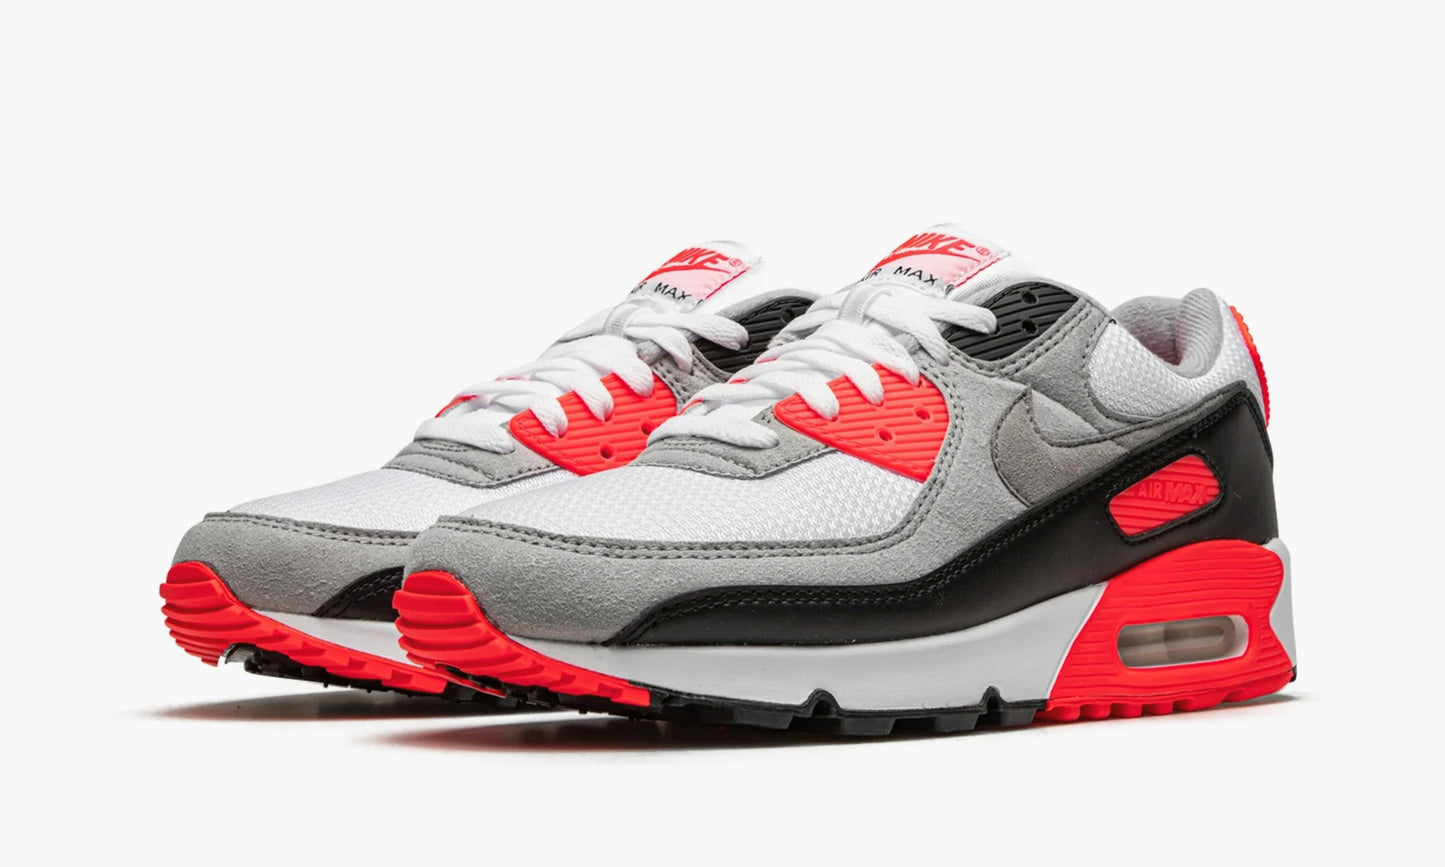 Nike Air Max 90 OG Infrared 2020 Sneakers - Farfetch